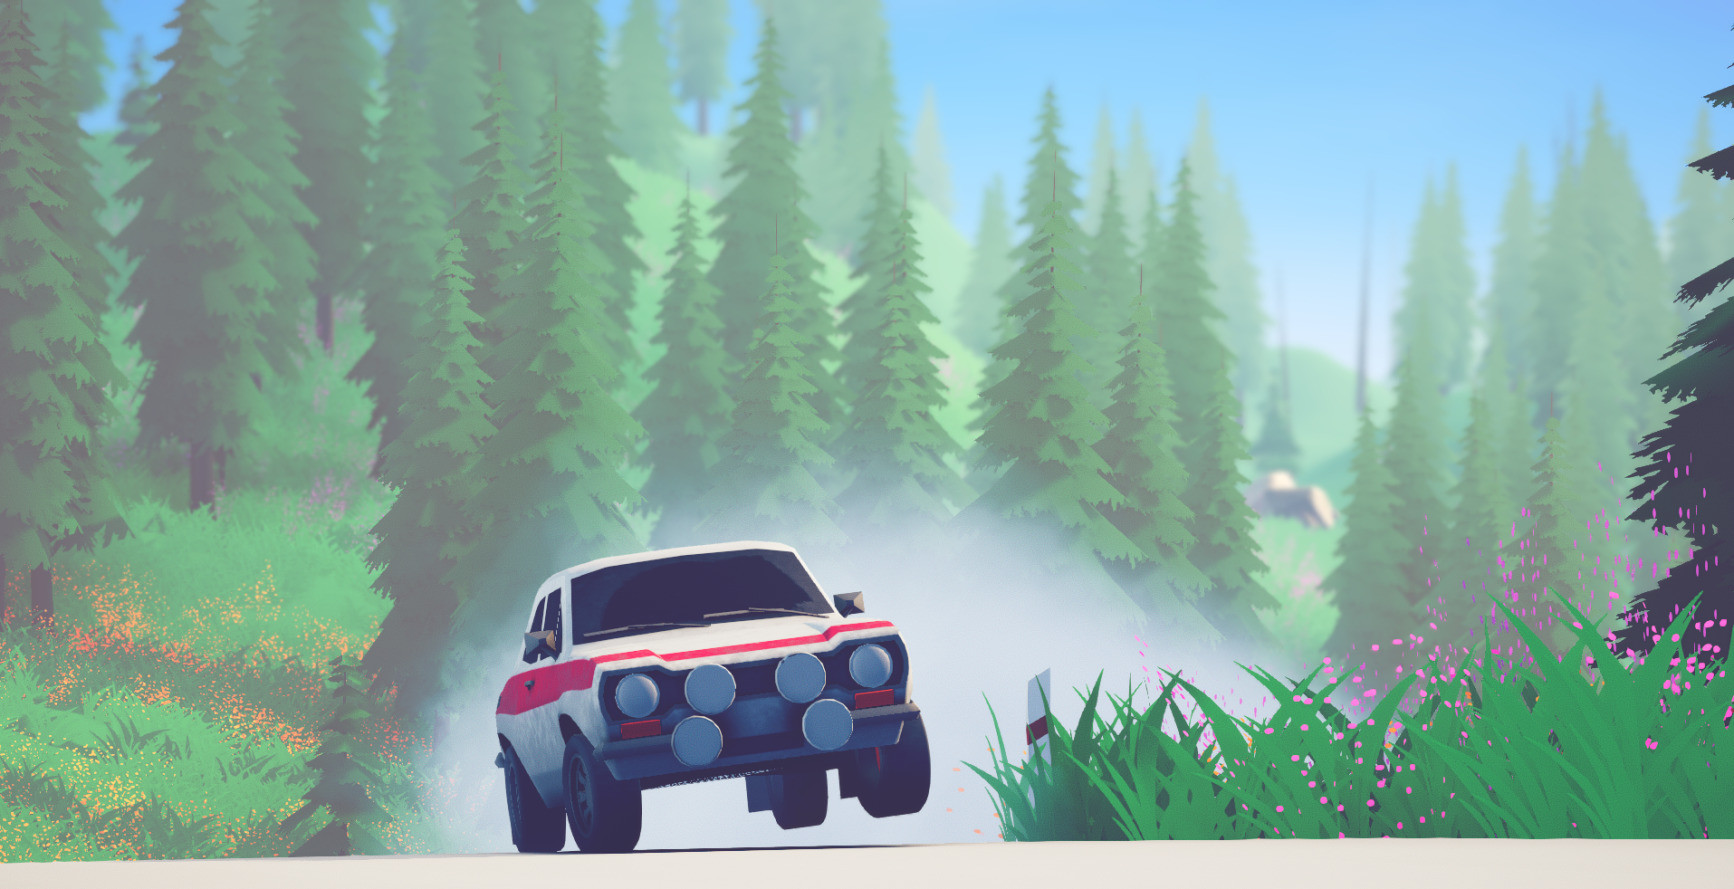 art of rally first person